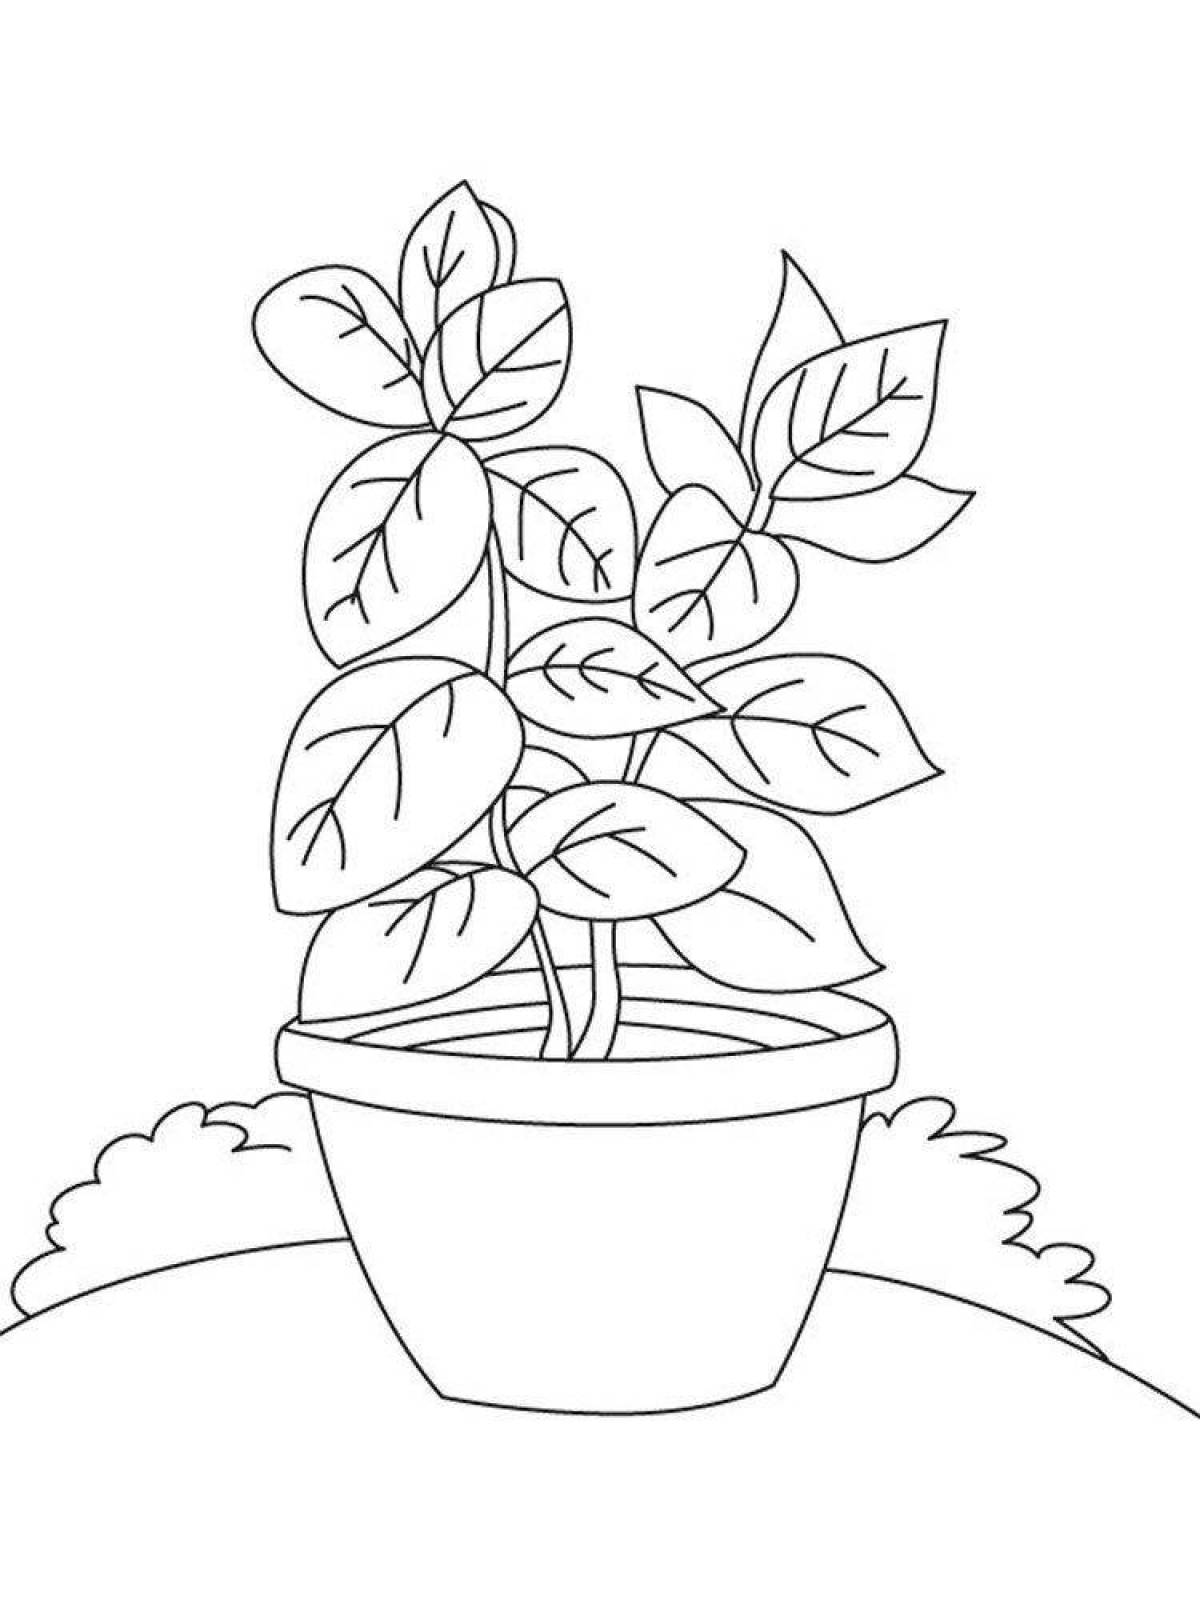 Glowing green friend coloring page